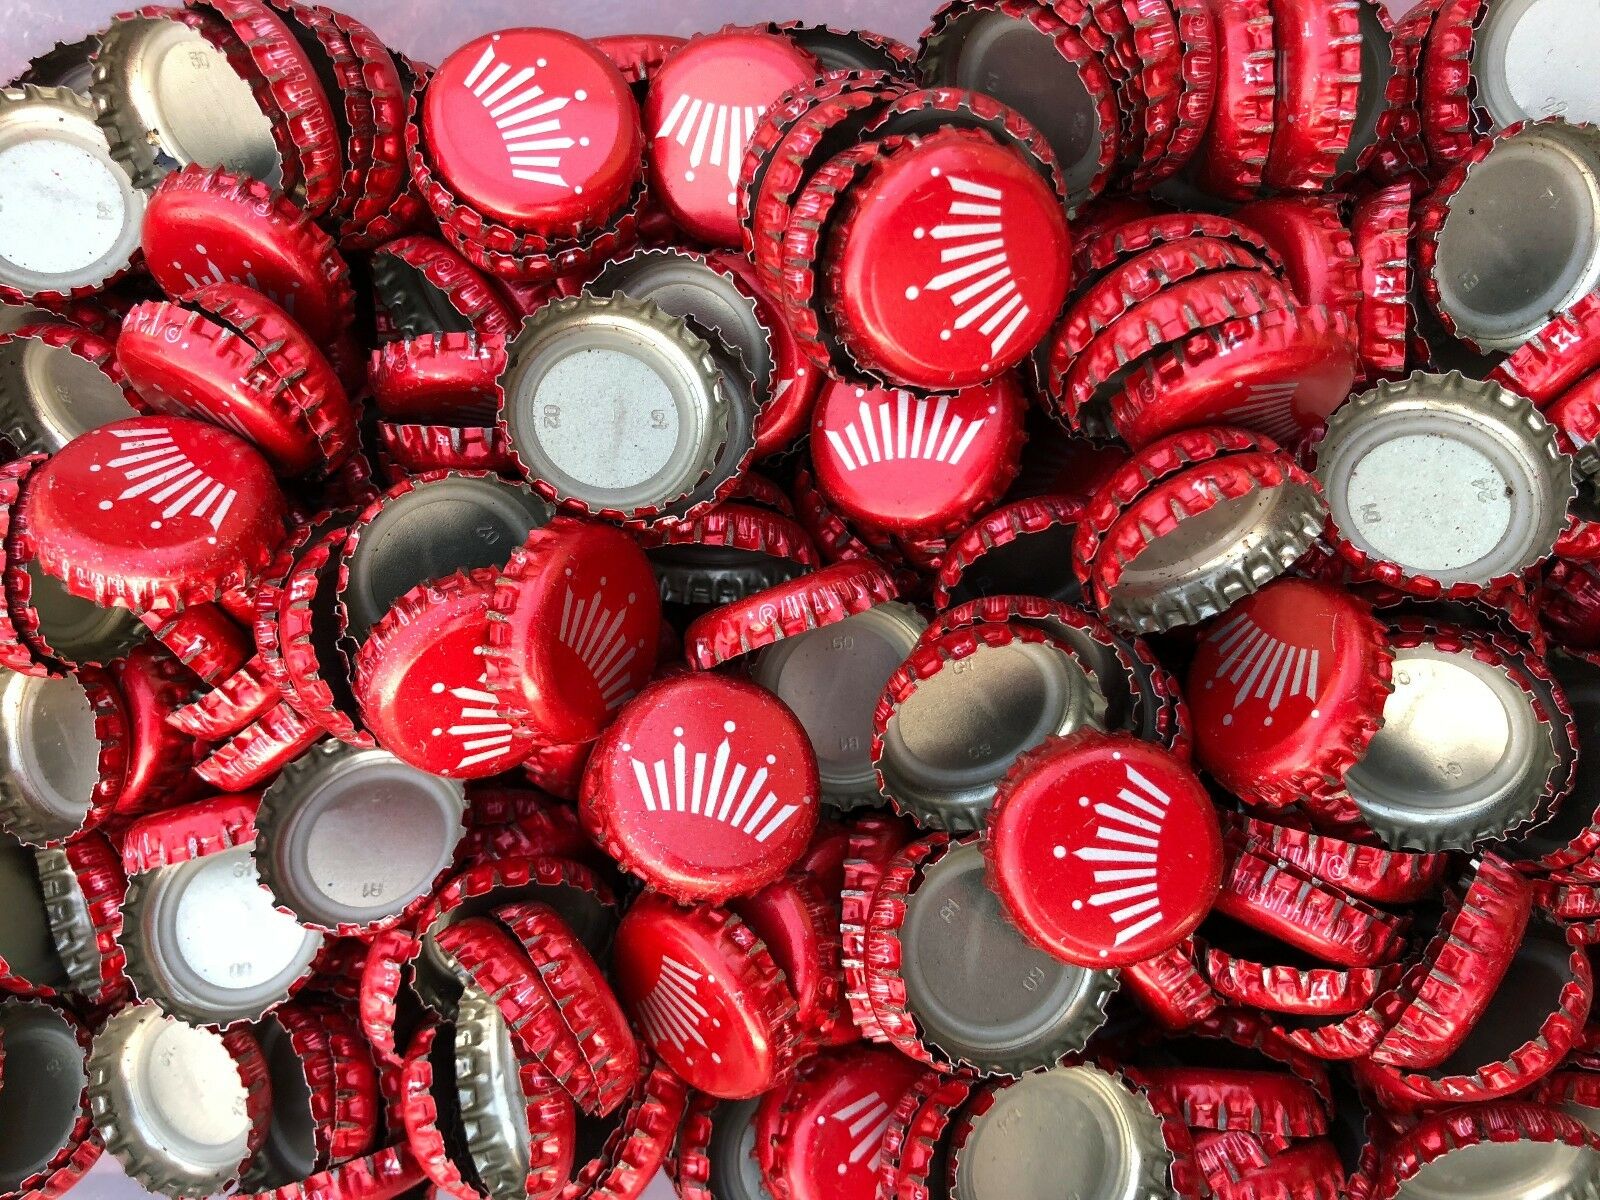 100 ((red Budweiser Crown)) Beer Bottle Caps No Dents. Free Shipping.